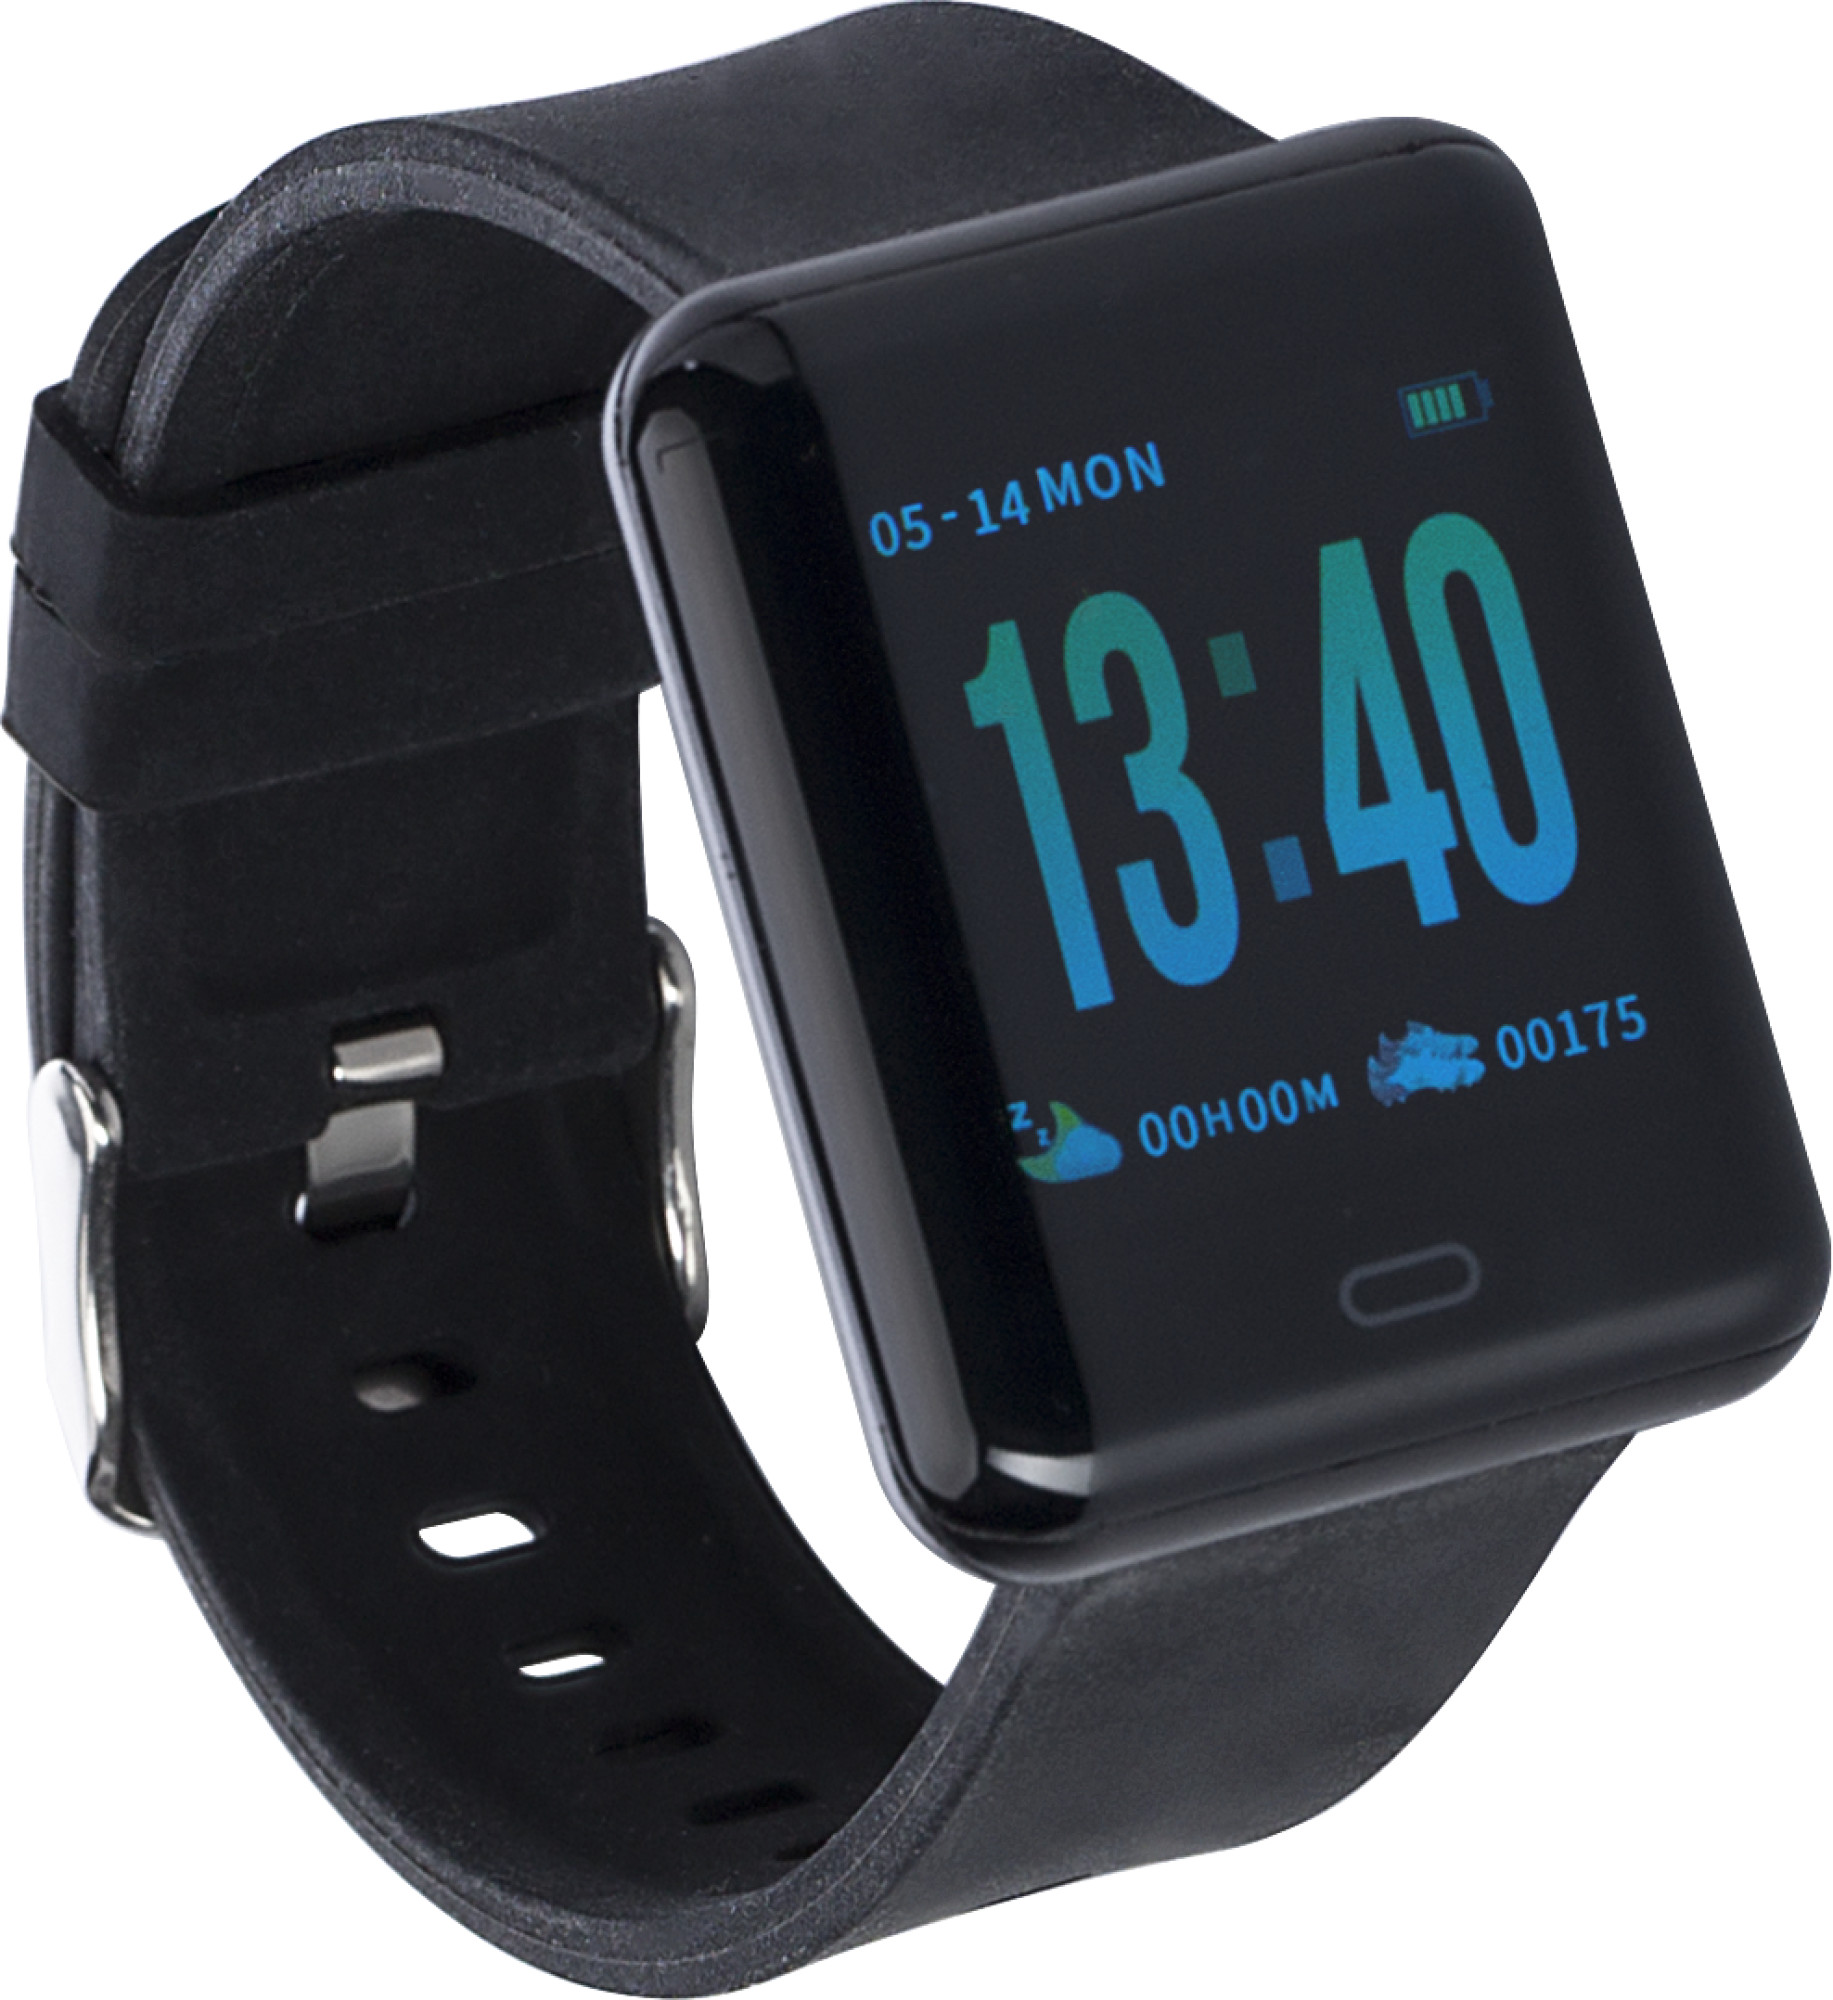 ABS smart watch with silicone wrist band